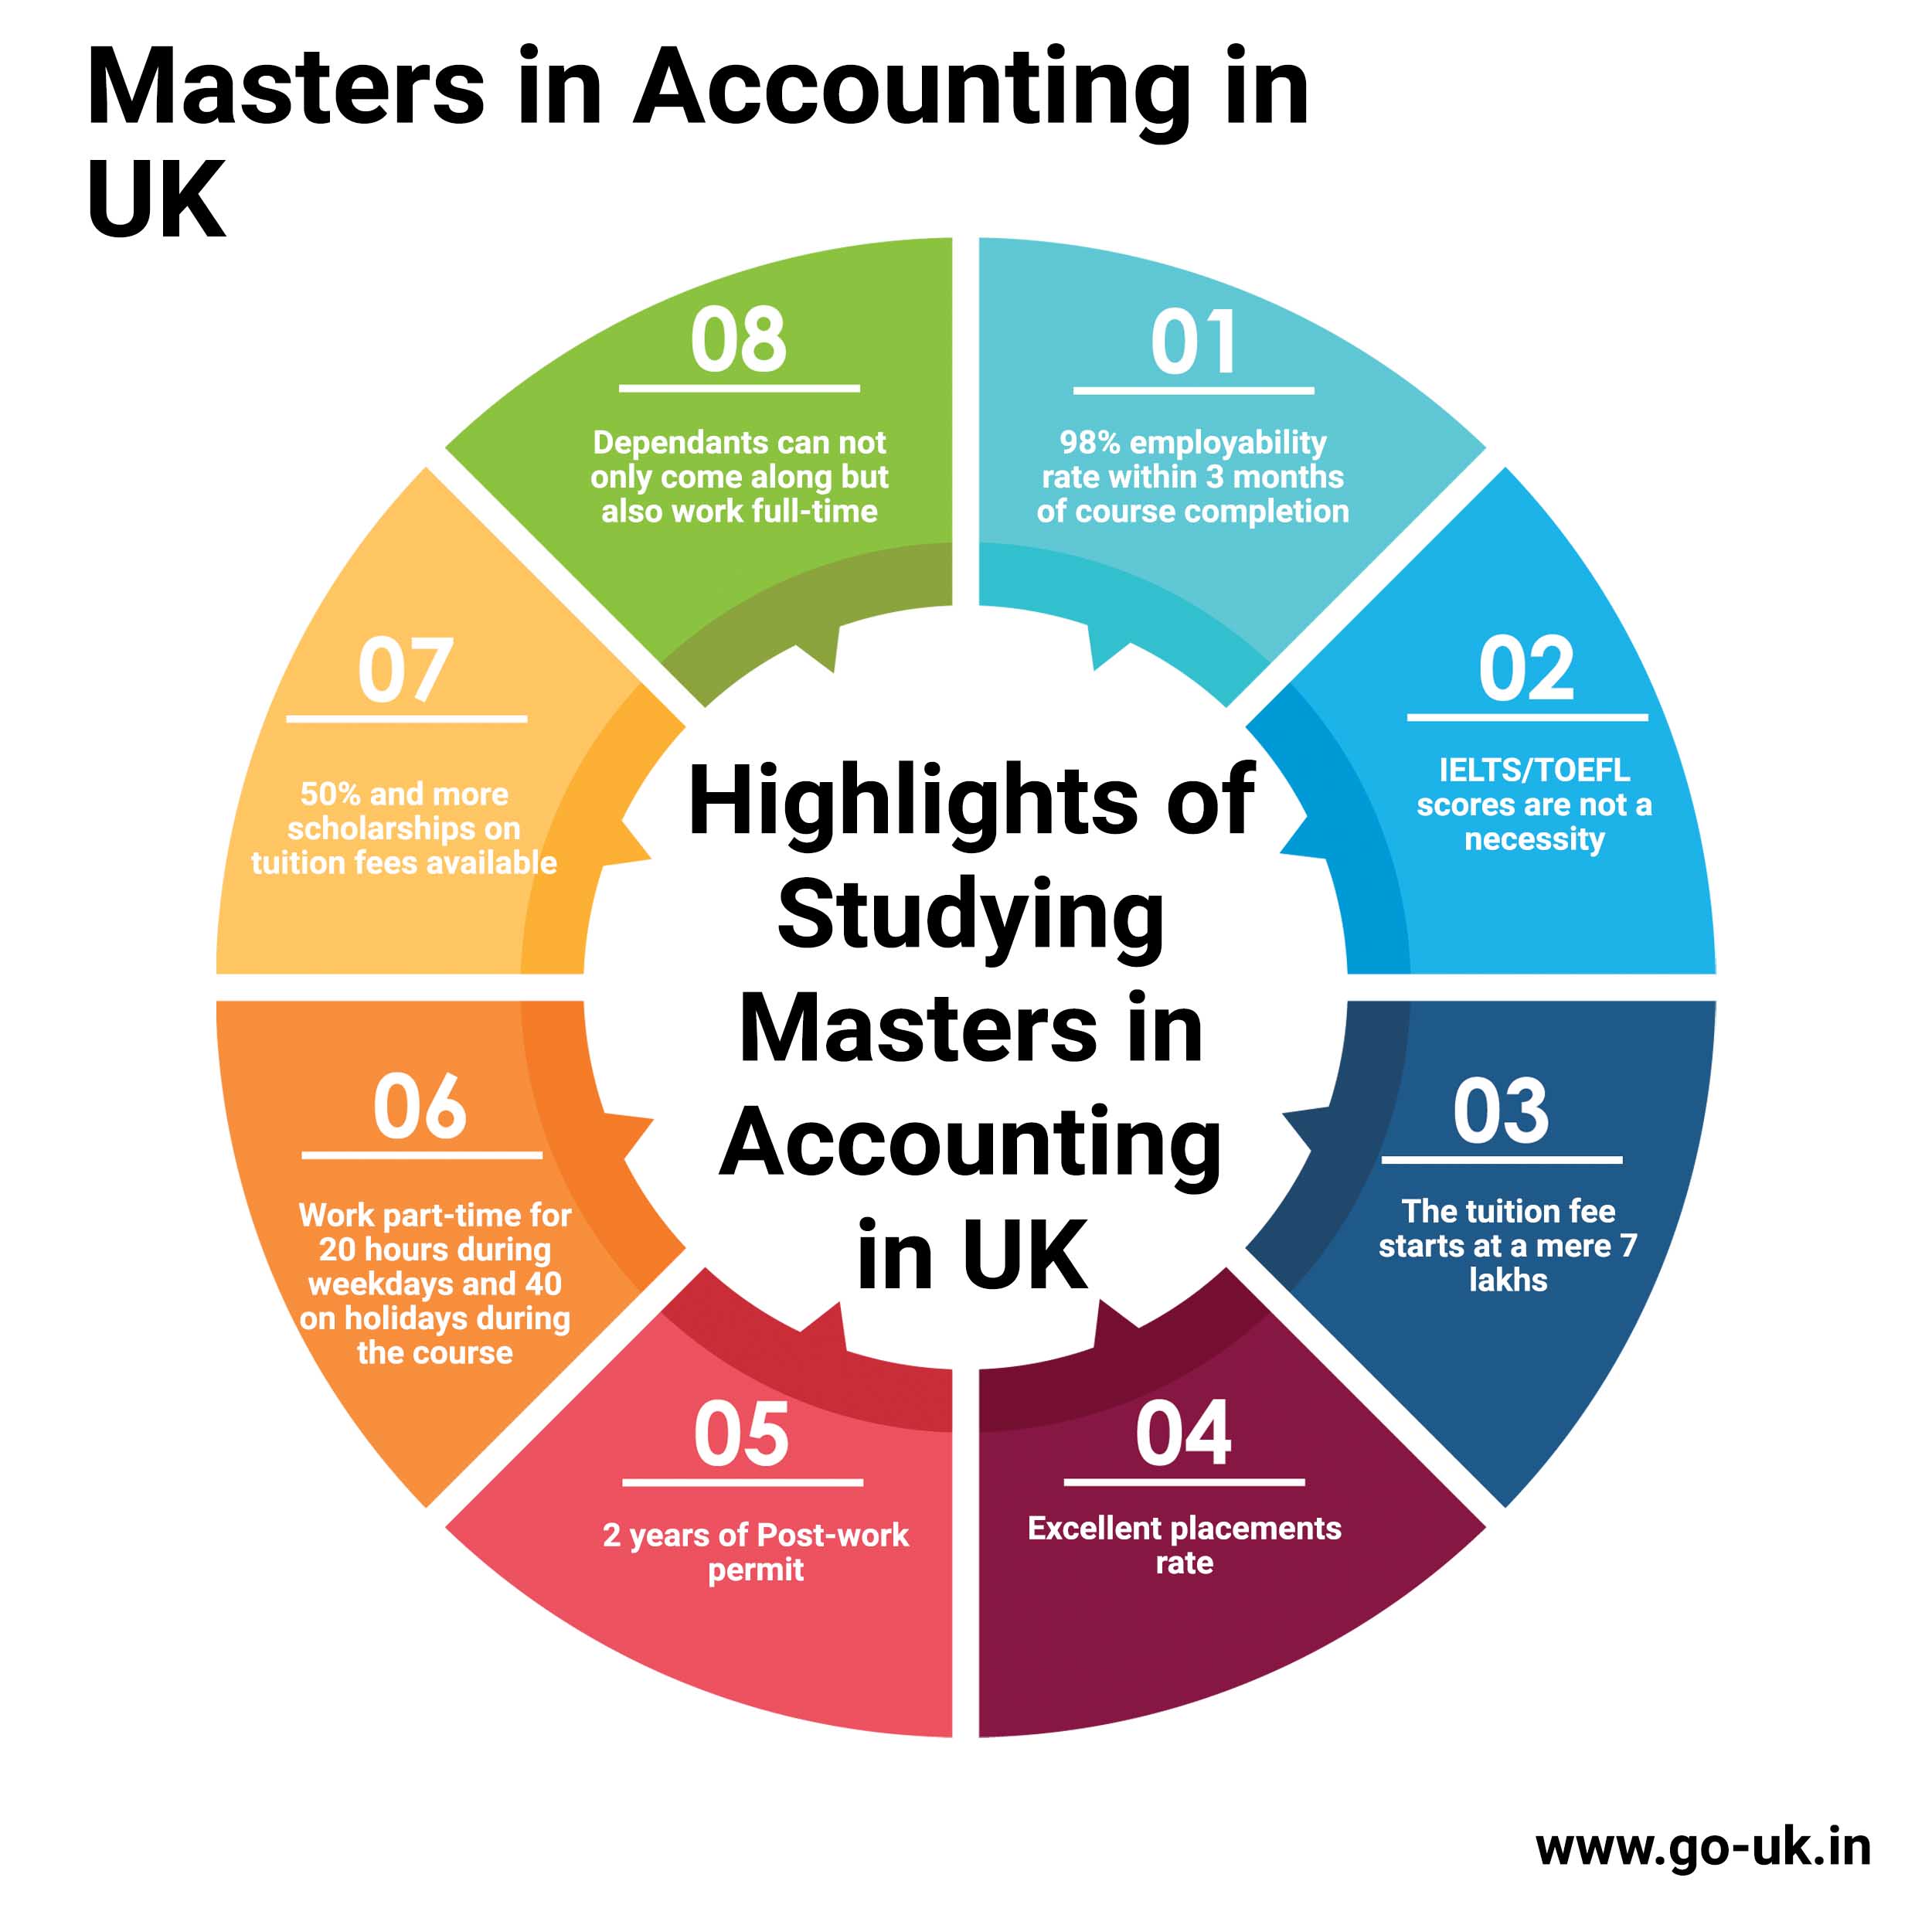 Highlights of Studying Masters in Accounting in UK